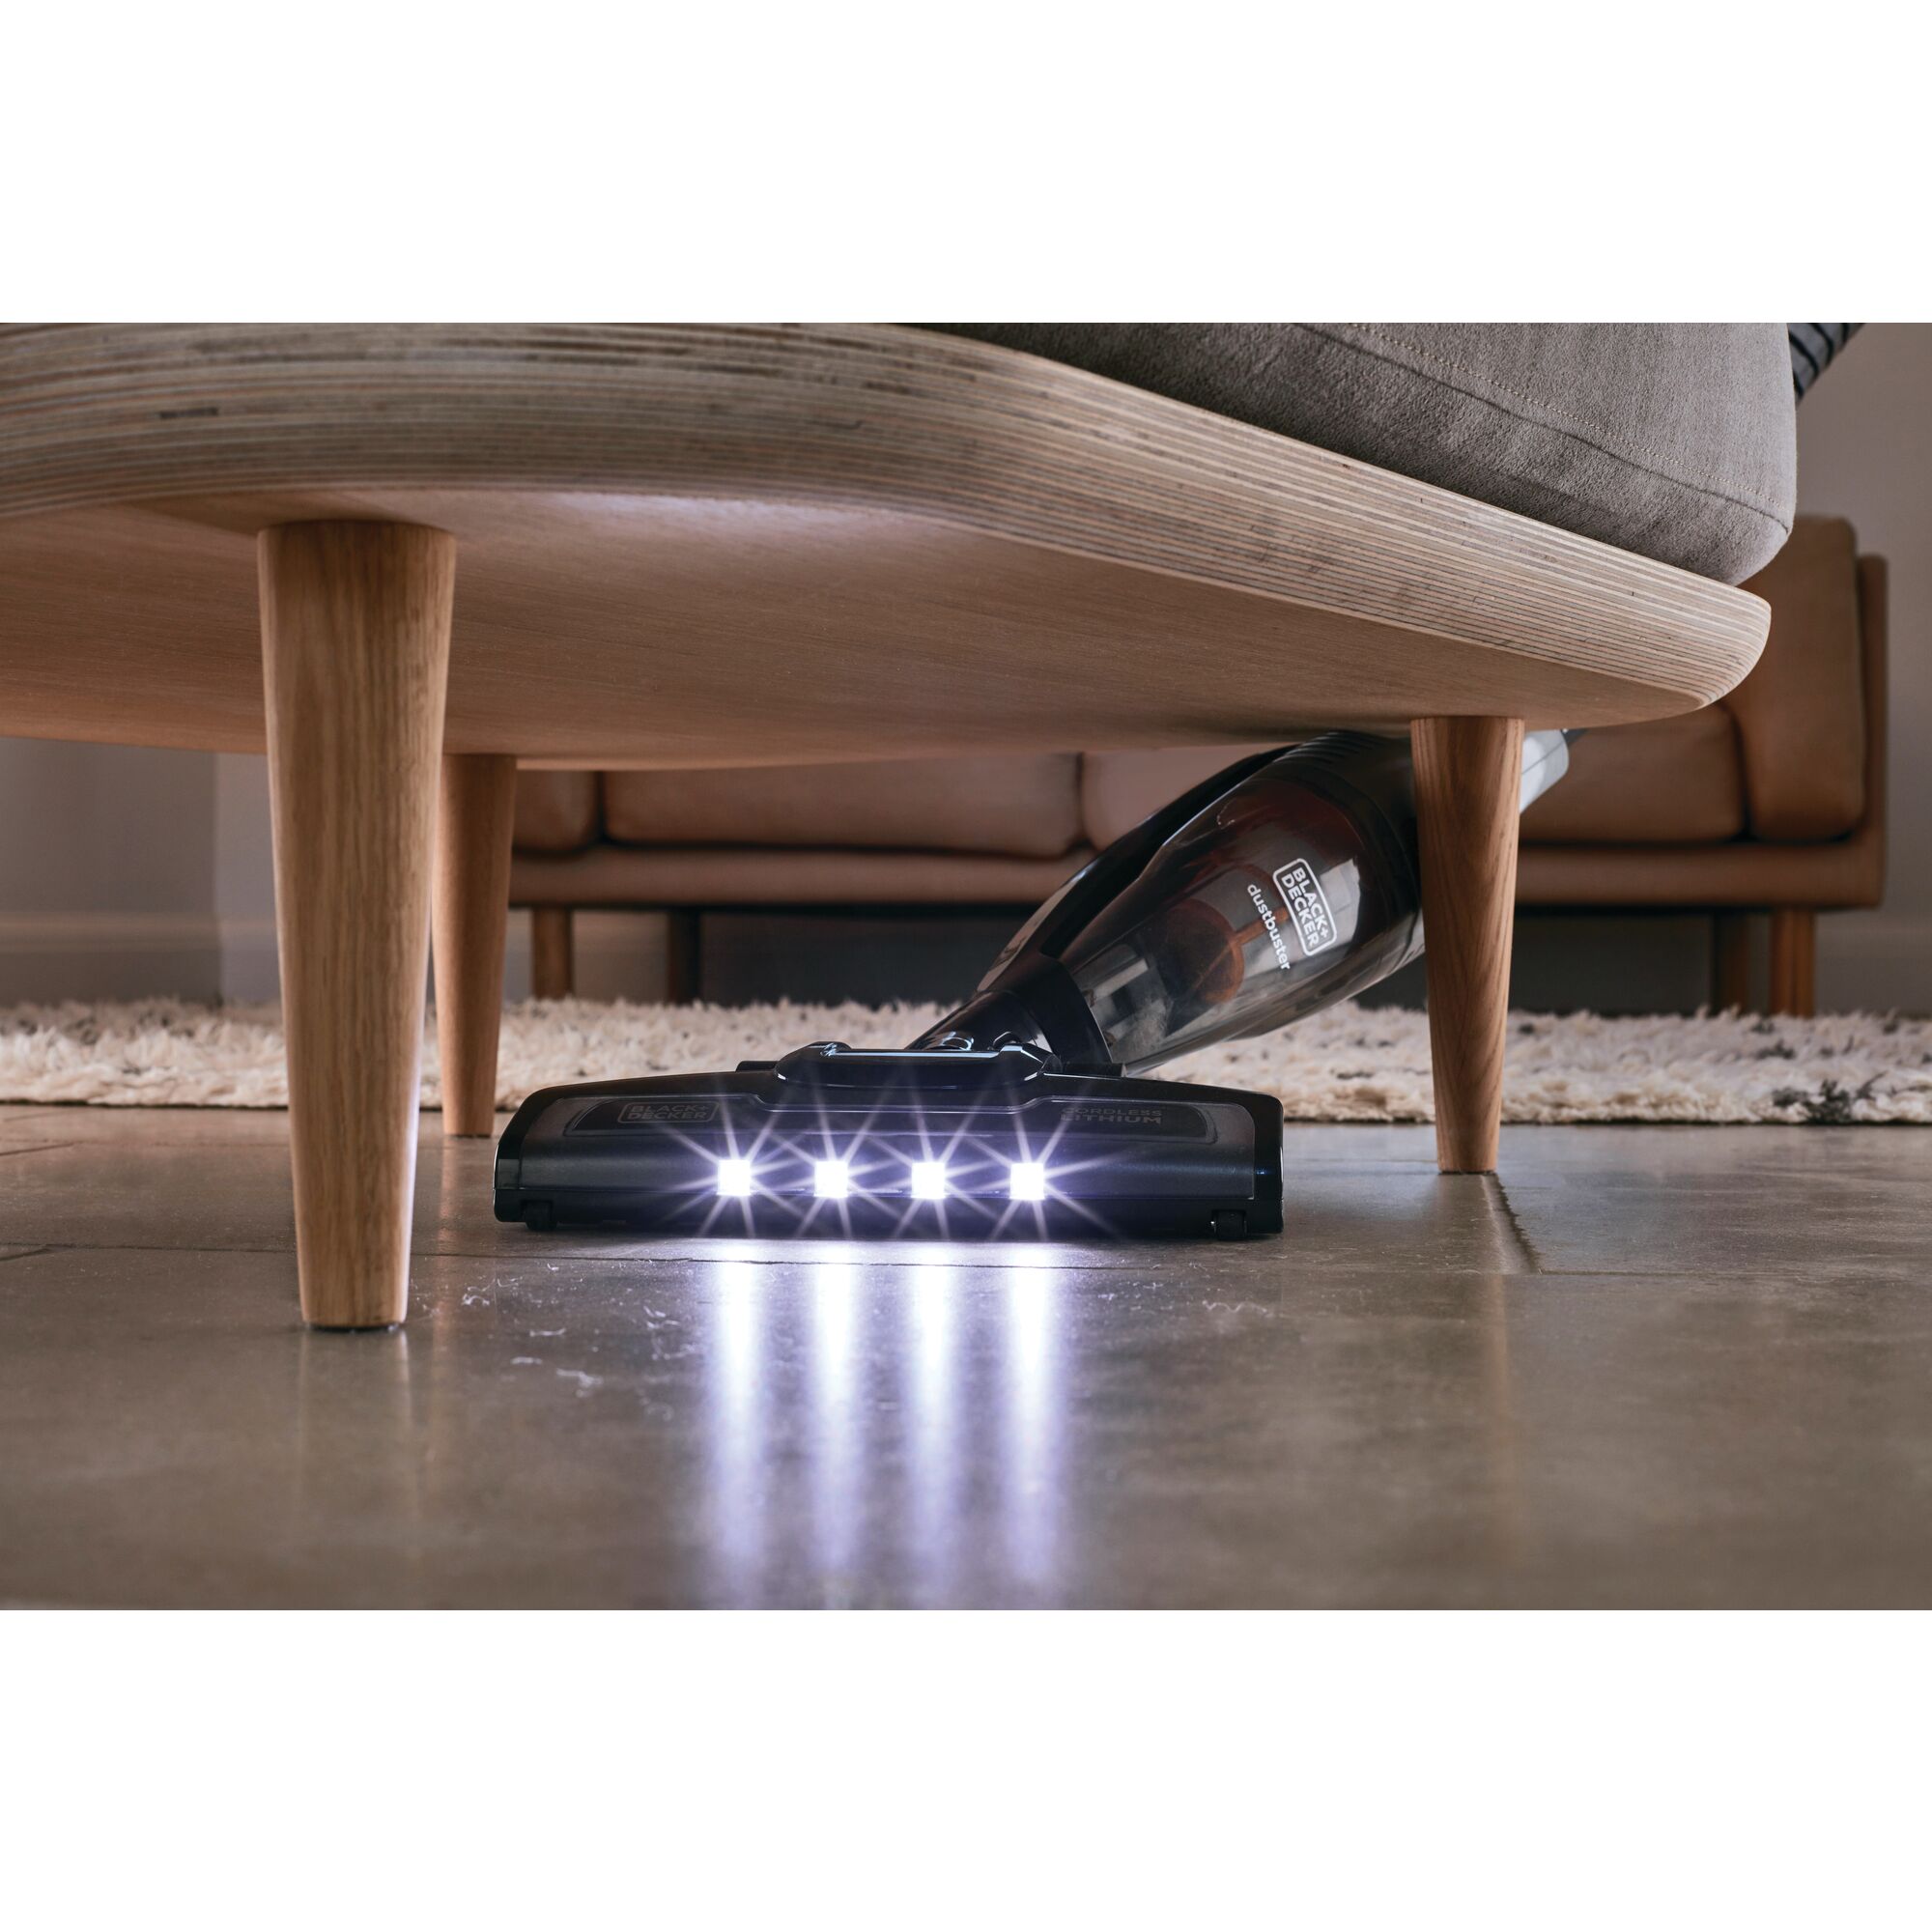 Led light feature of power series 2 in 1 cordless stick vacuum.